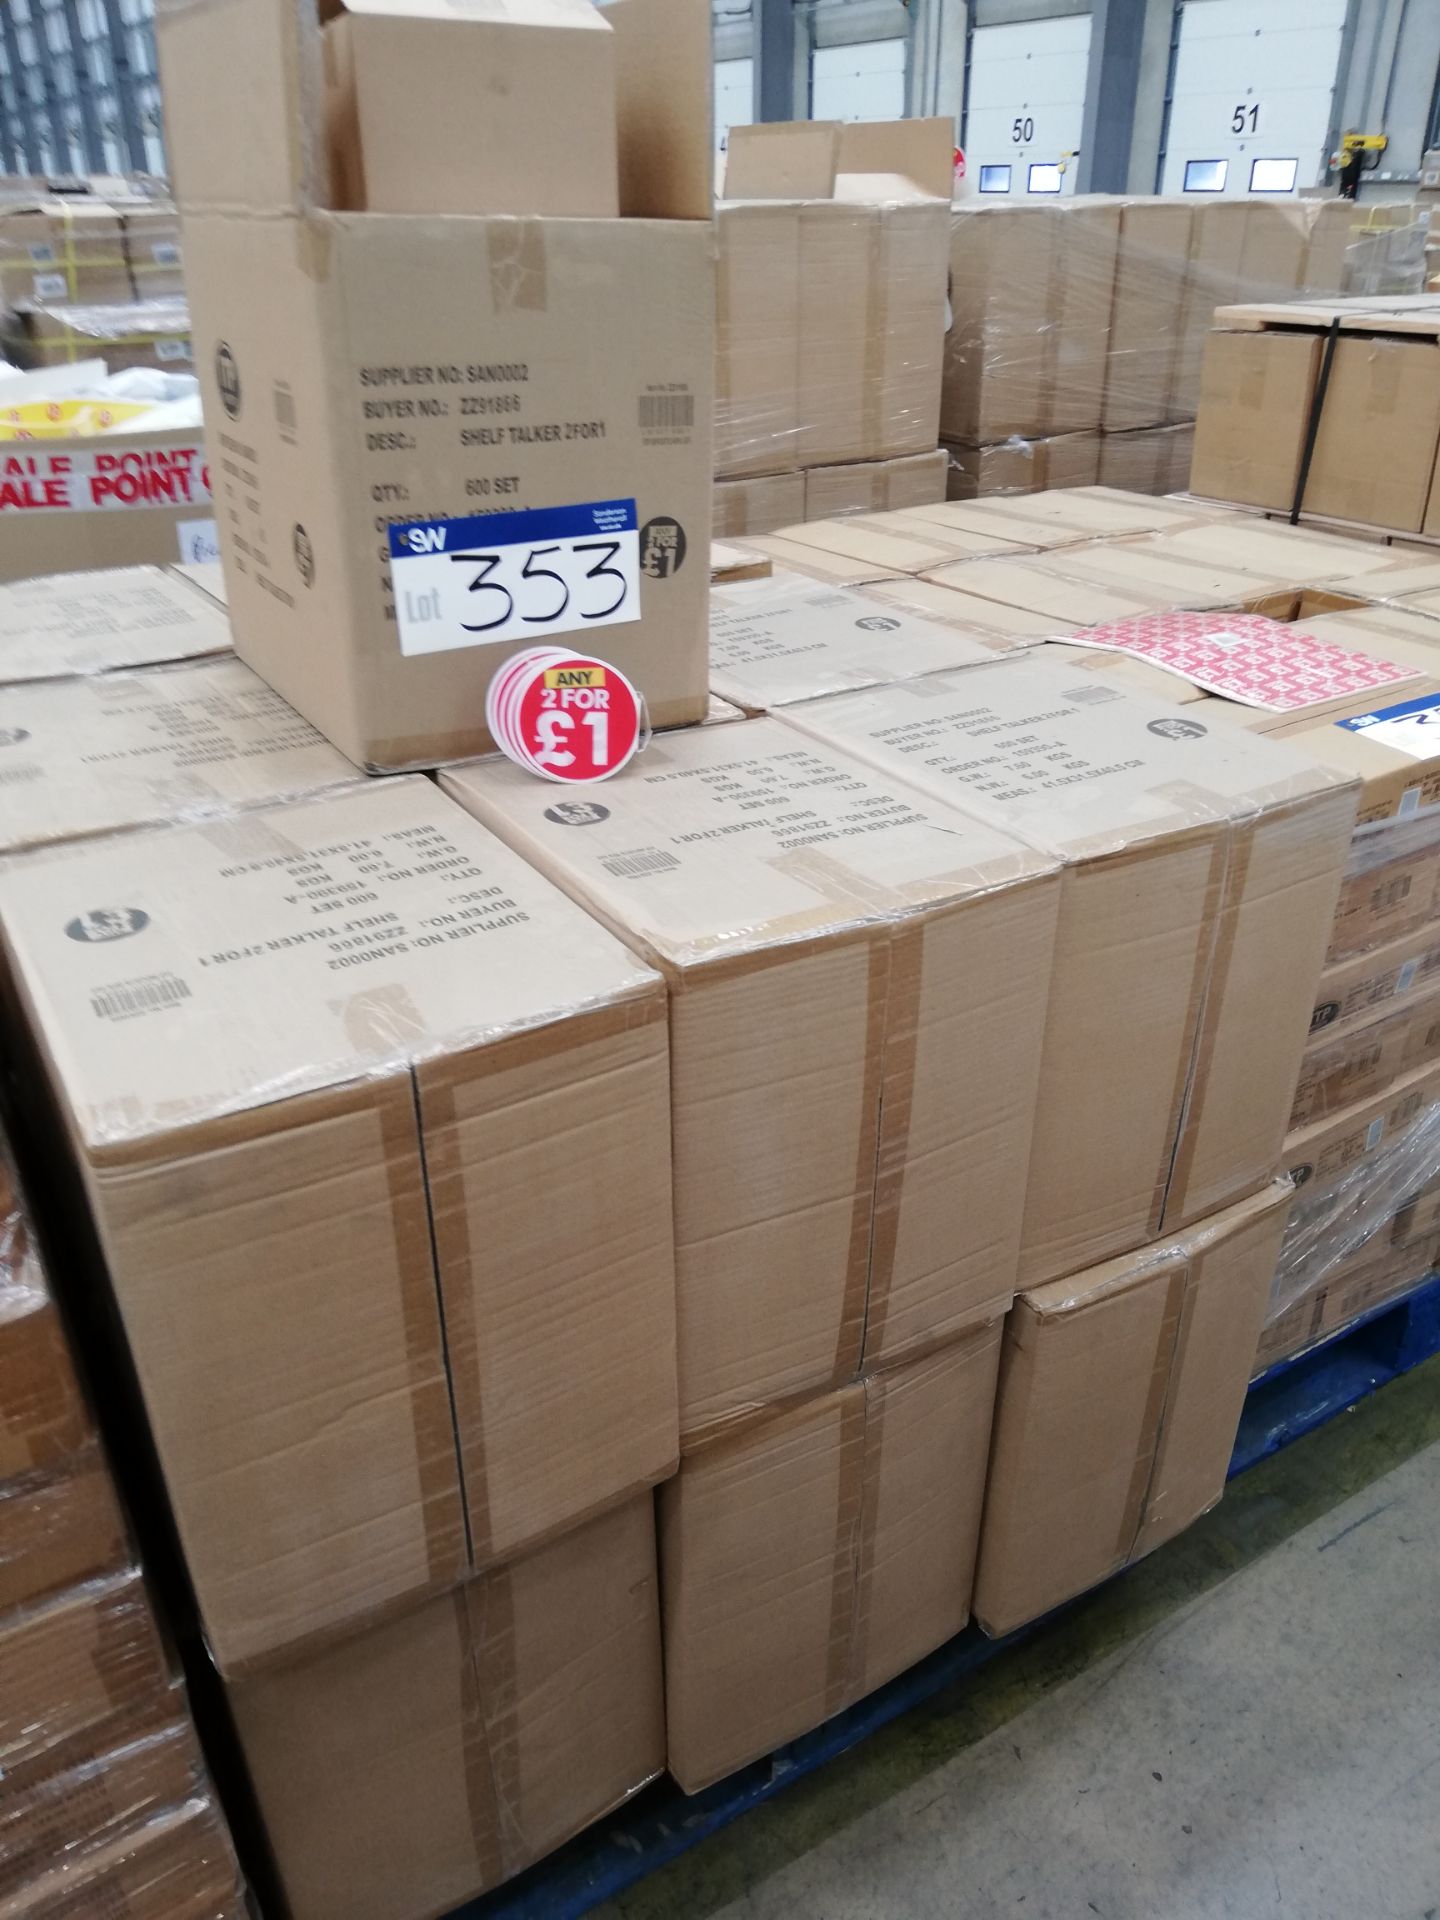 11,400 x Shelf Talkers ‘Any 2 for £1’ (Boxed)